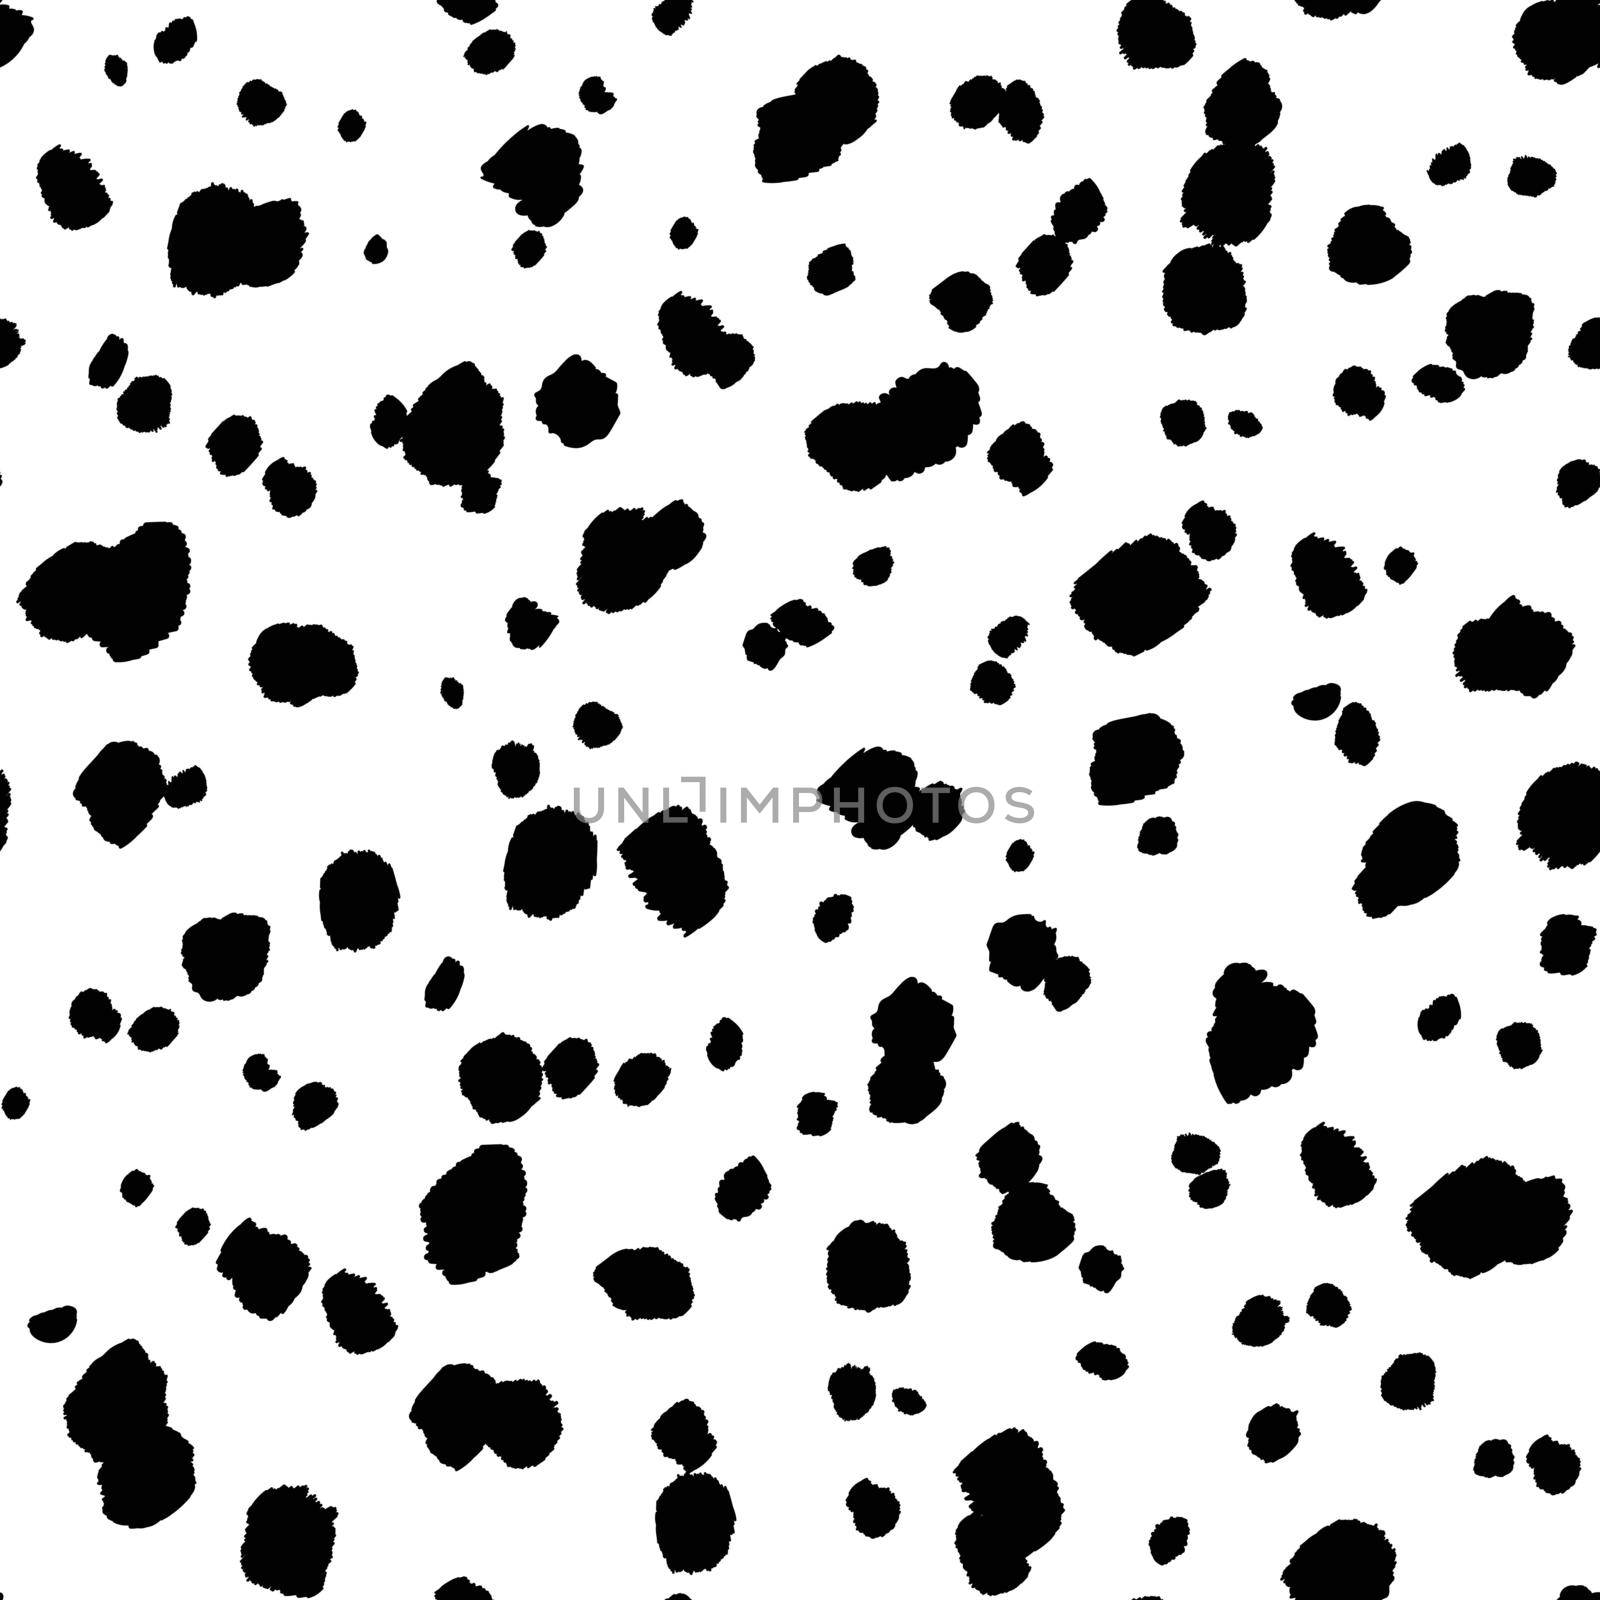 Abstract modern dalmatian seamless pattern. Animals trendy background. Black and white decorative vector illustration for print, card, postcard, fabric, textile. Modern ornament of stylized skin by allaku